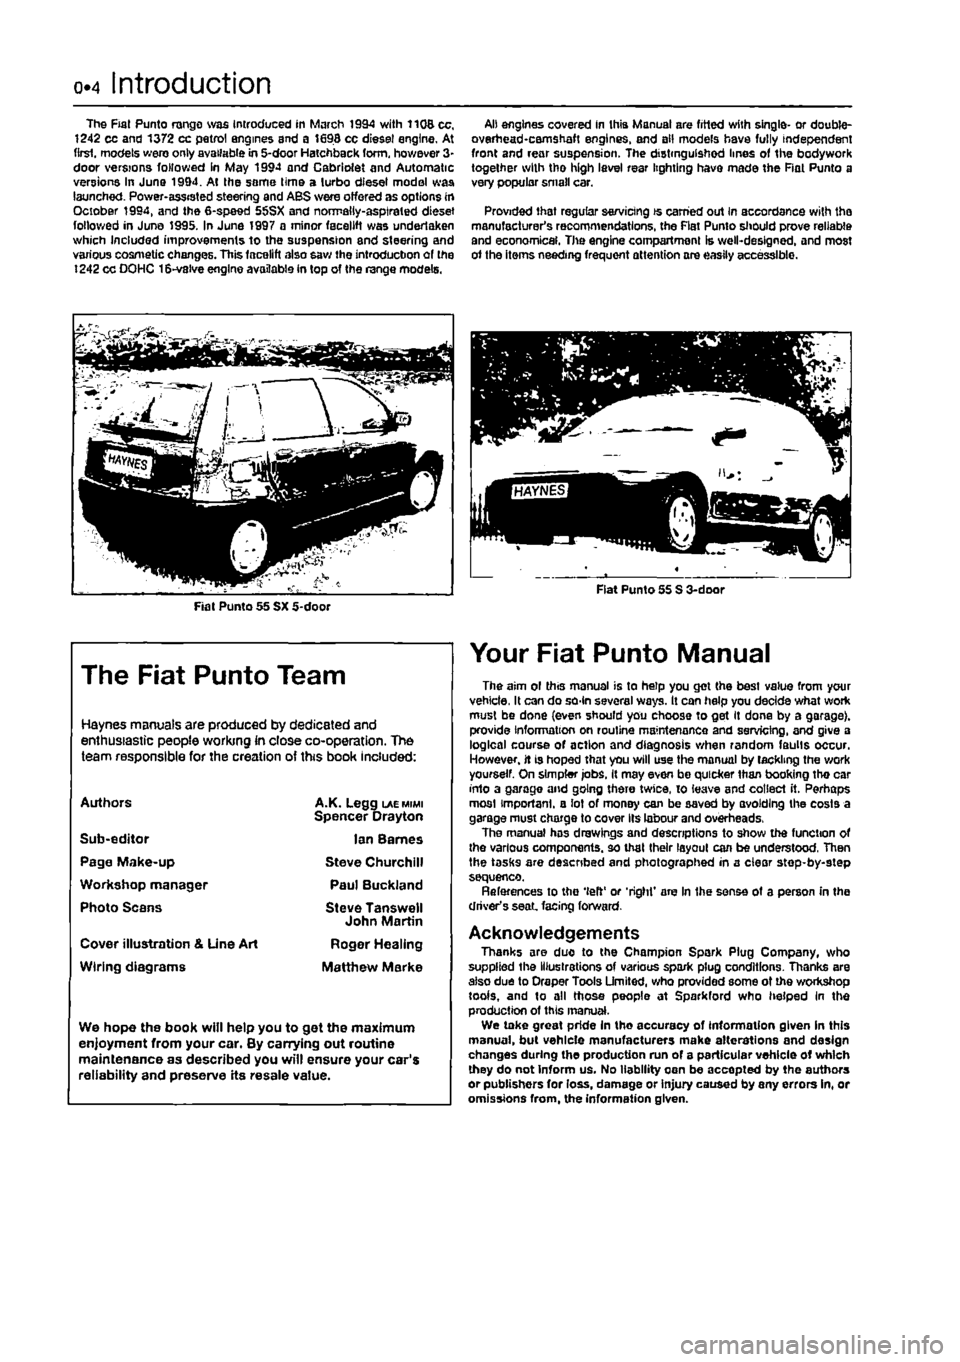 FIAT PUNTO 1999 176 / 1.G Workshop Manual 
0.4 Introduction 
The Fiat Punto range was Introduced in March 1994 with 1106 cc, 1242 cc and 1372 cc petrol engines and a 1698 cc diesel engine. At first, models wero only available in 5-door Hatchb